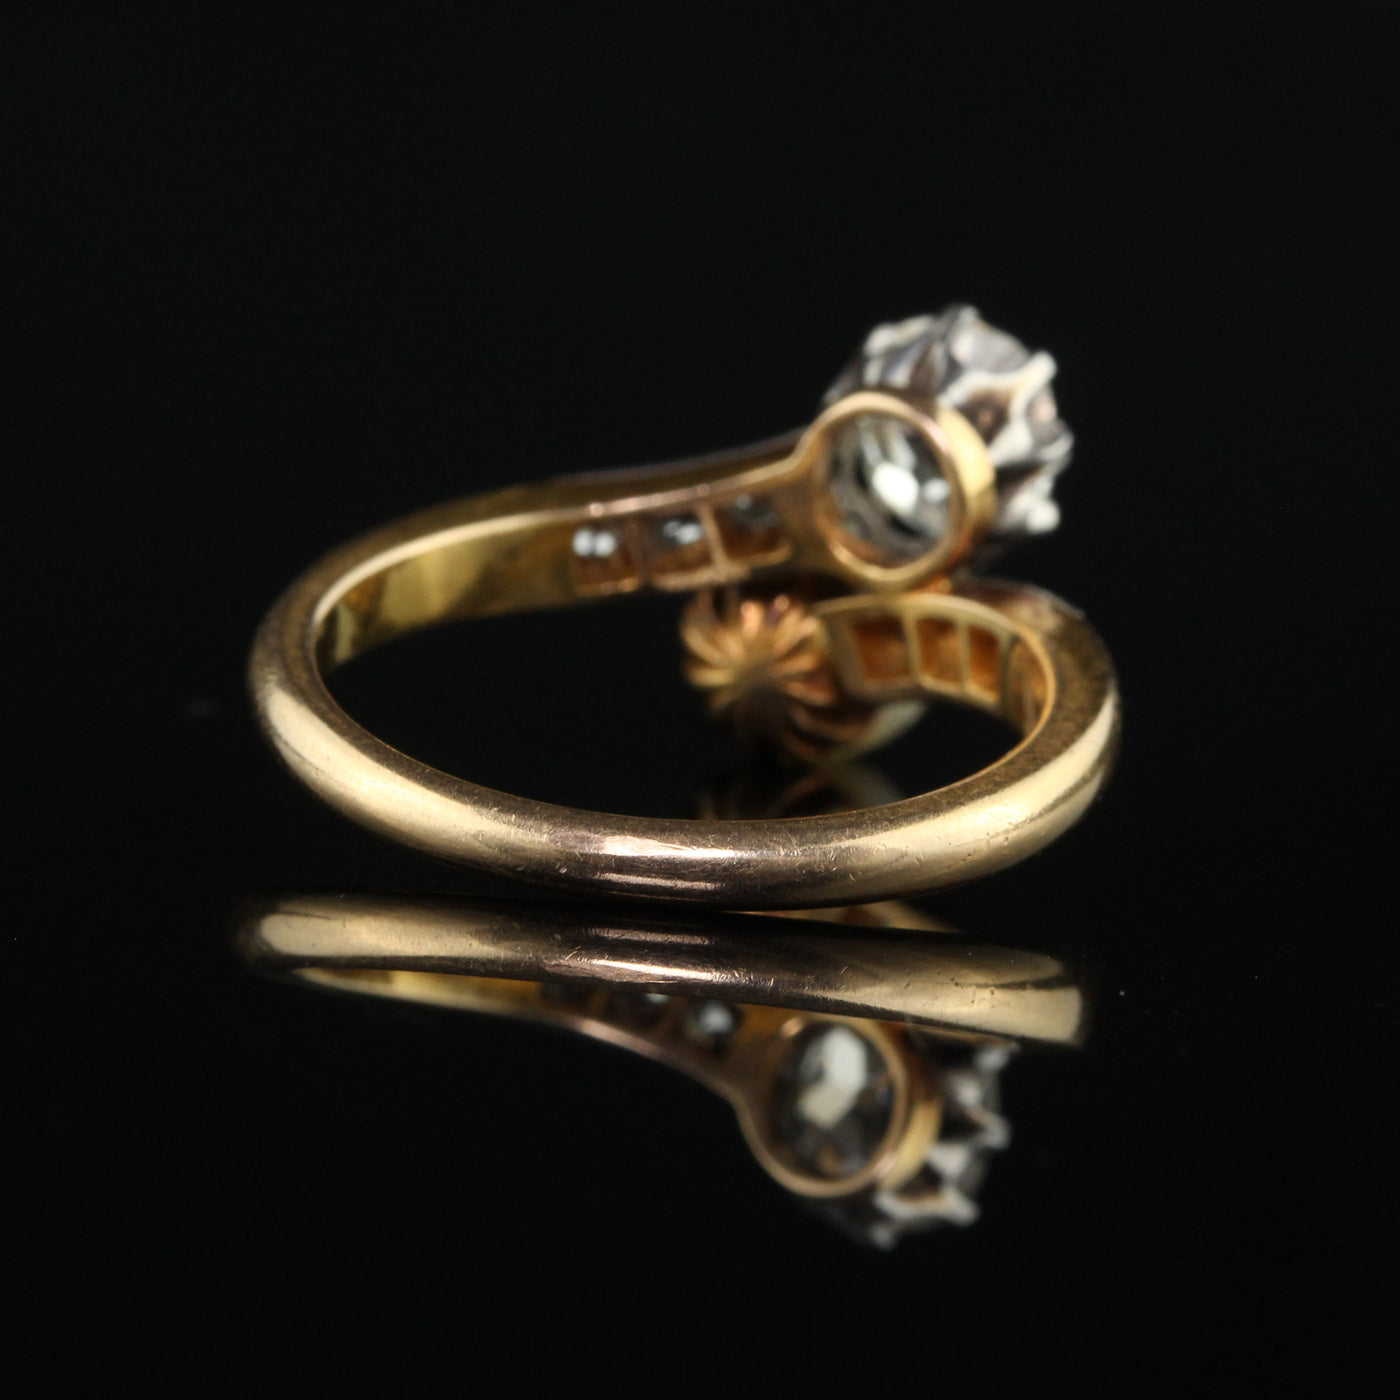 Antique Edwardian 18K Yellow Gold Old Mine Cut Diamond and Pearl Toi et Moi Engagement Ring